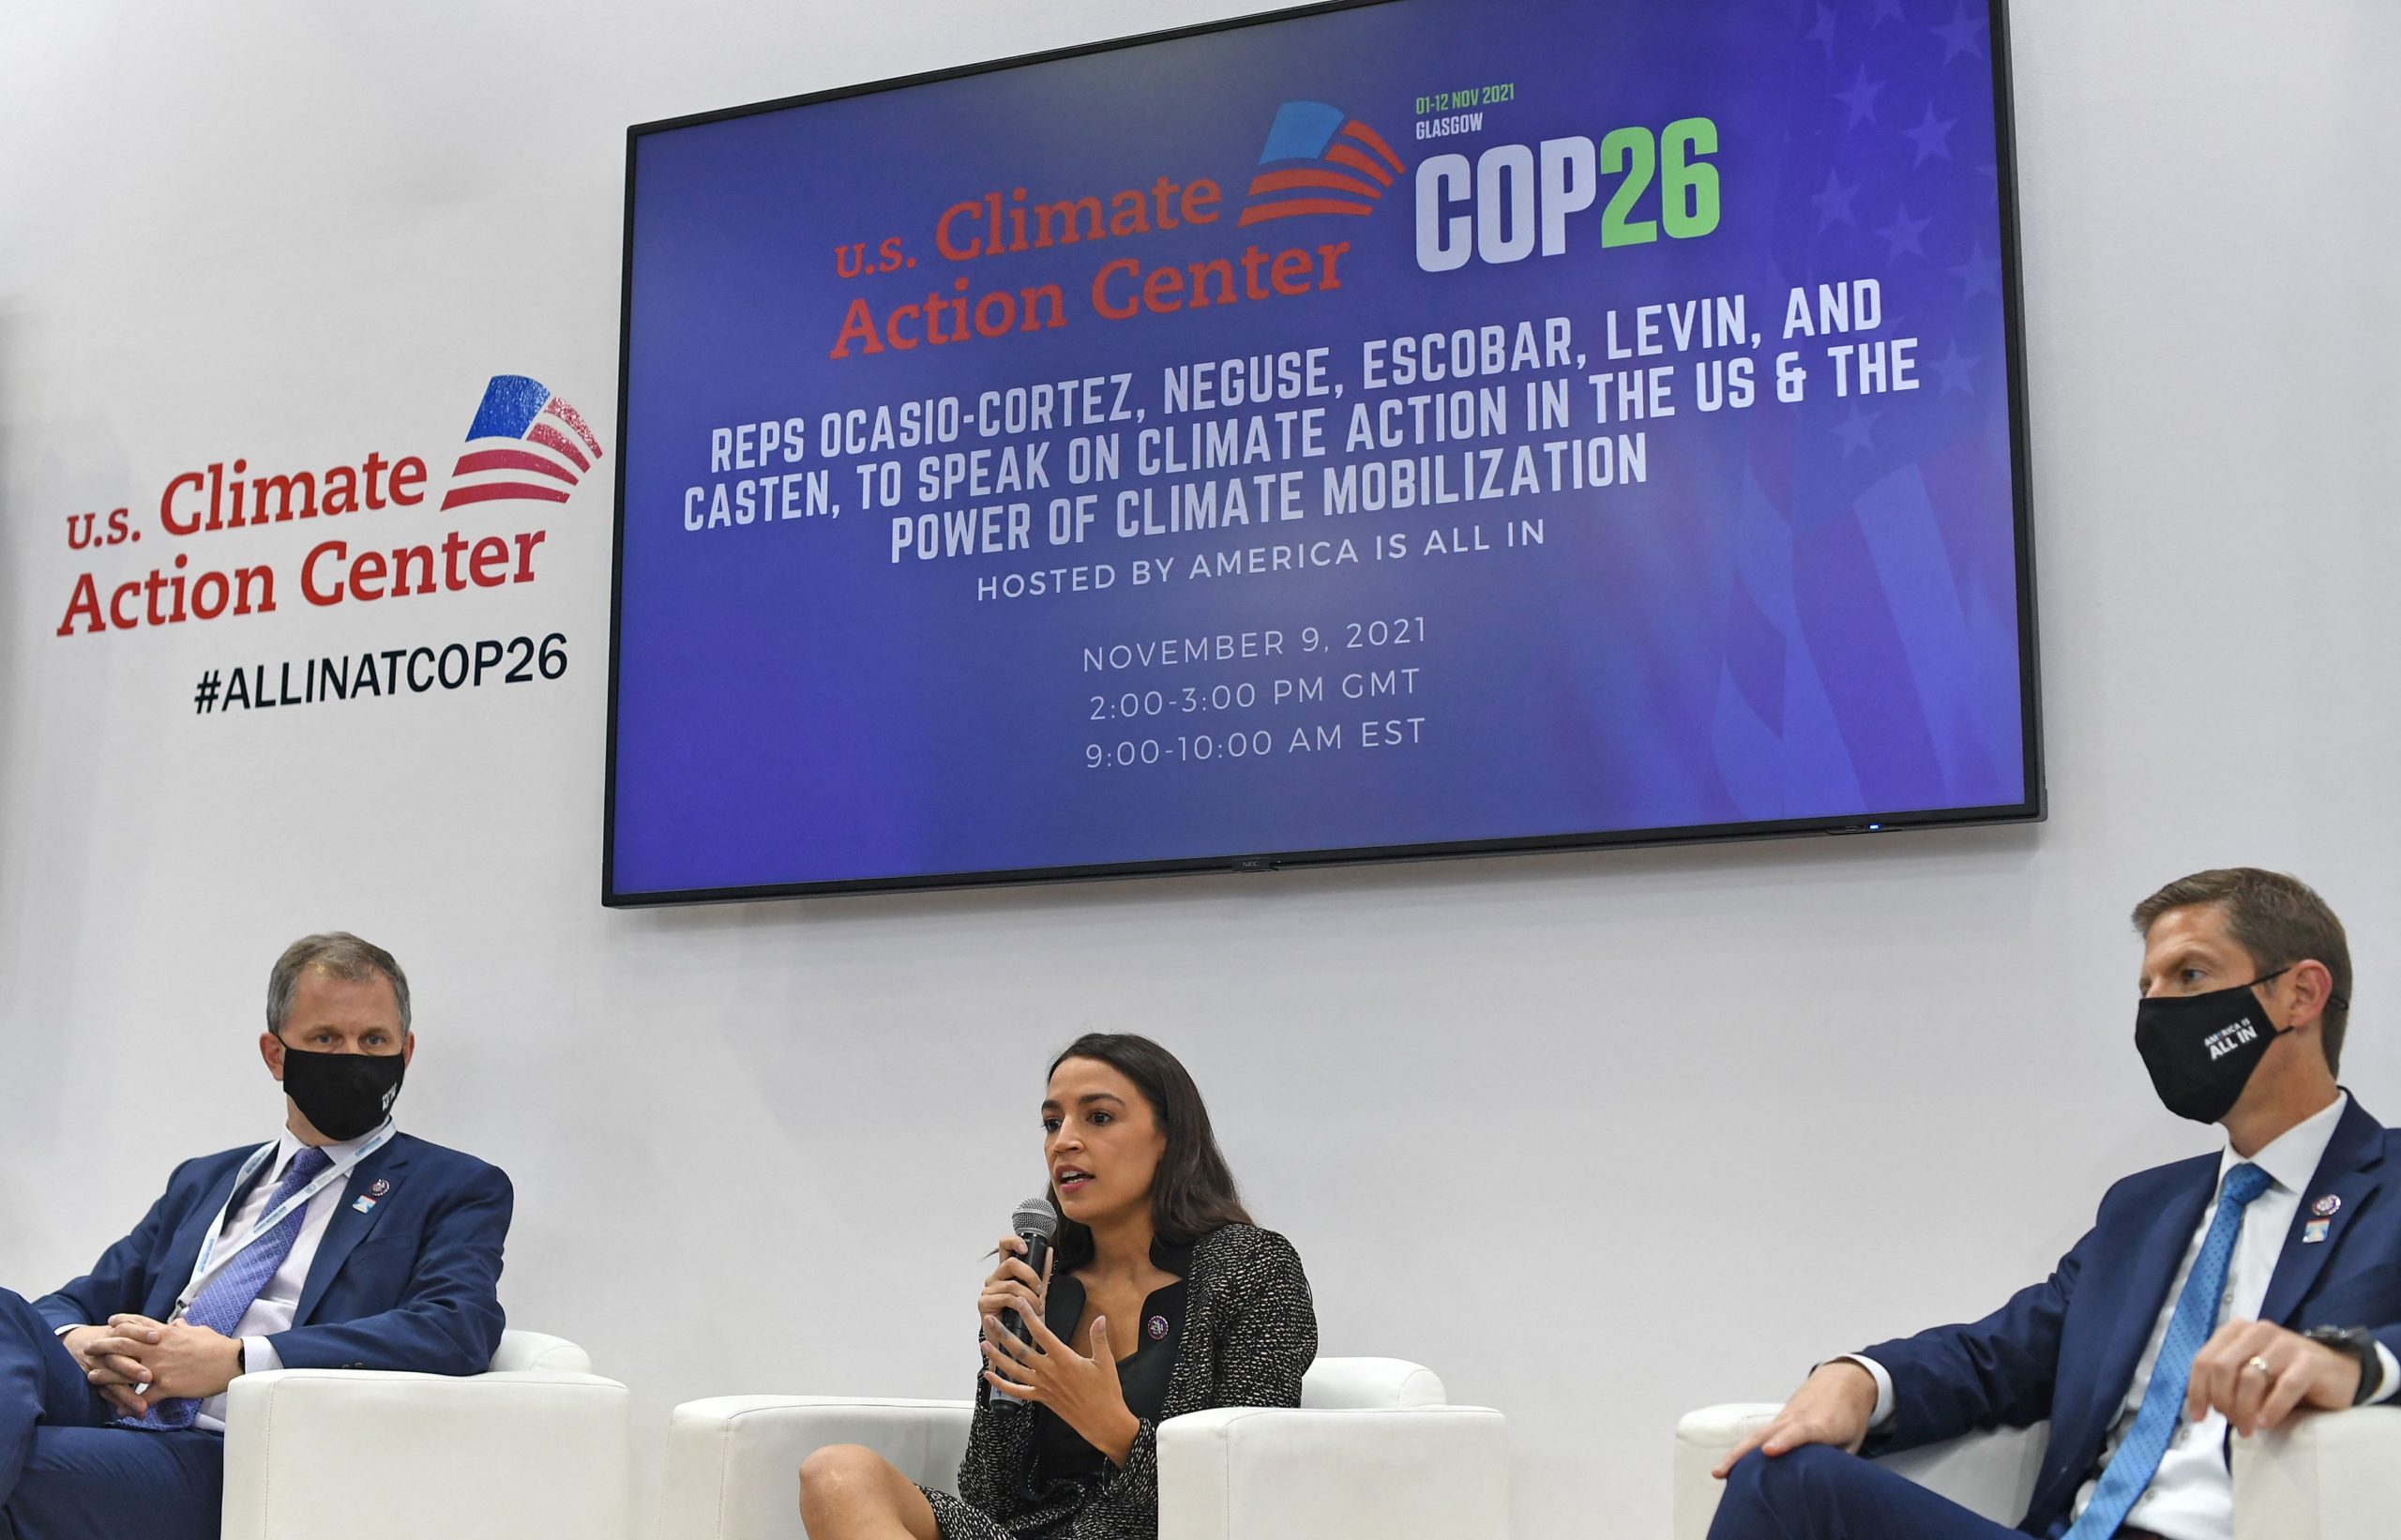 Democratic Reps. Sean Casten (left) and Mike Levin (right) look on as Rep. Alexandria Ocasio-Cortez speaks at the COP26 UN Climate Change Conference in Glasgow on Nov. 9. (Paul Ellis/AFP via Getty Images)